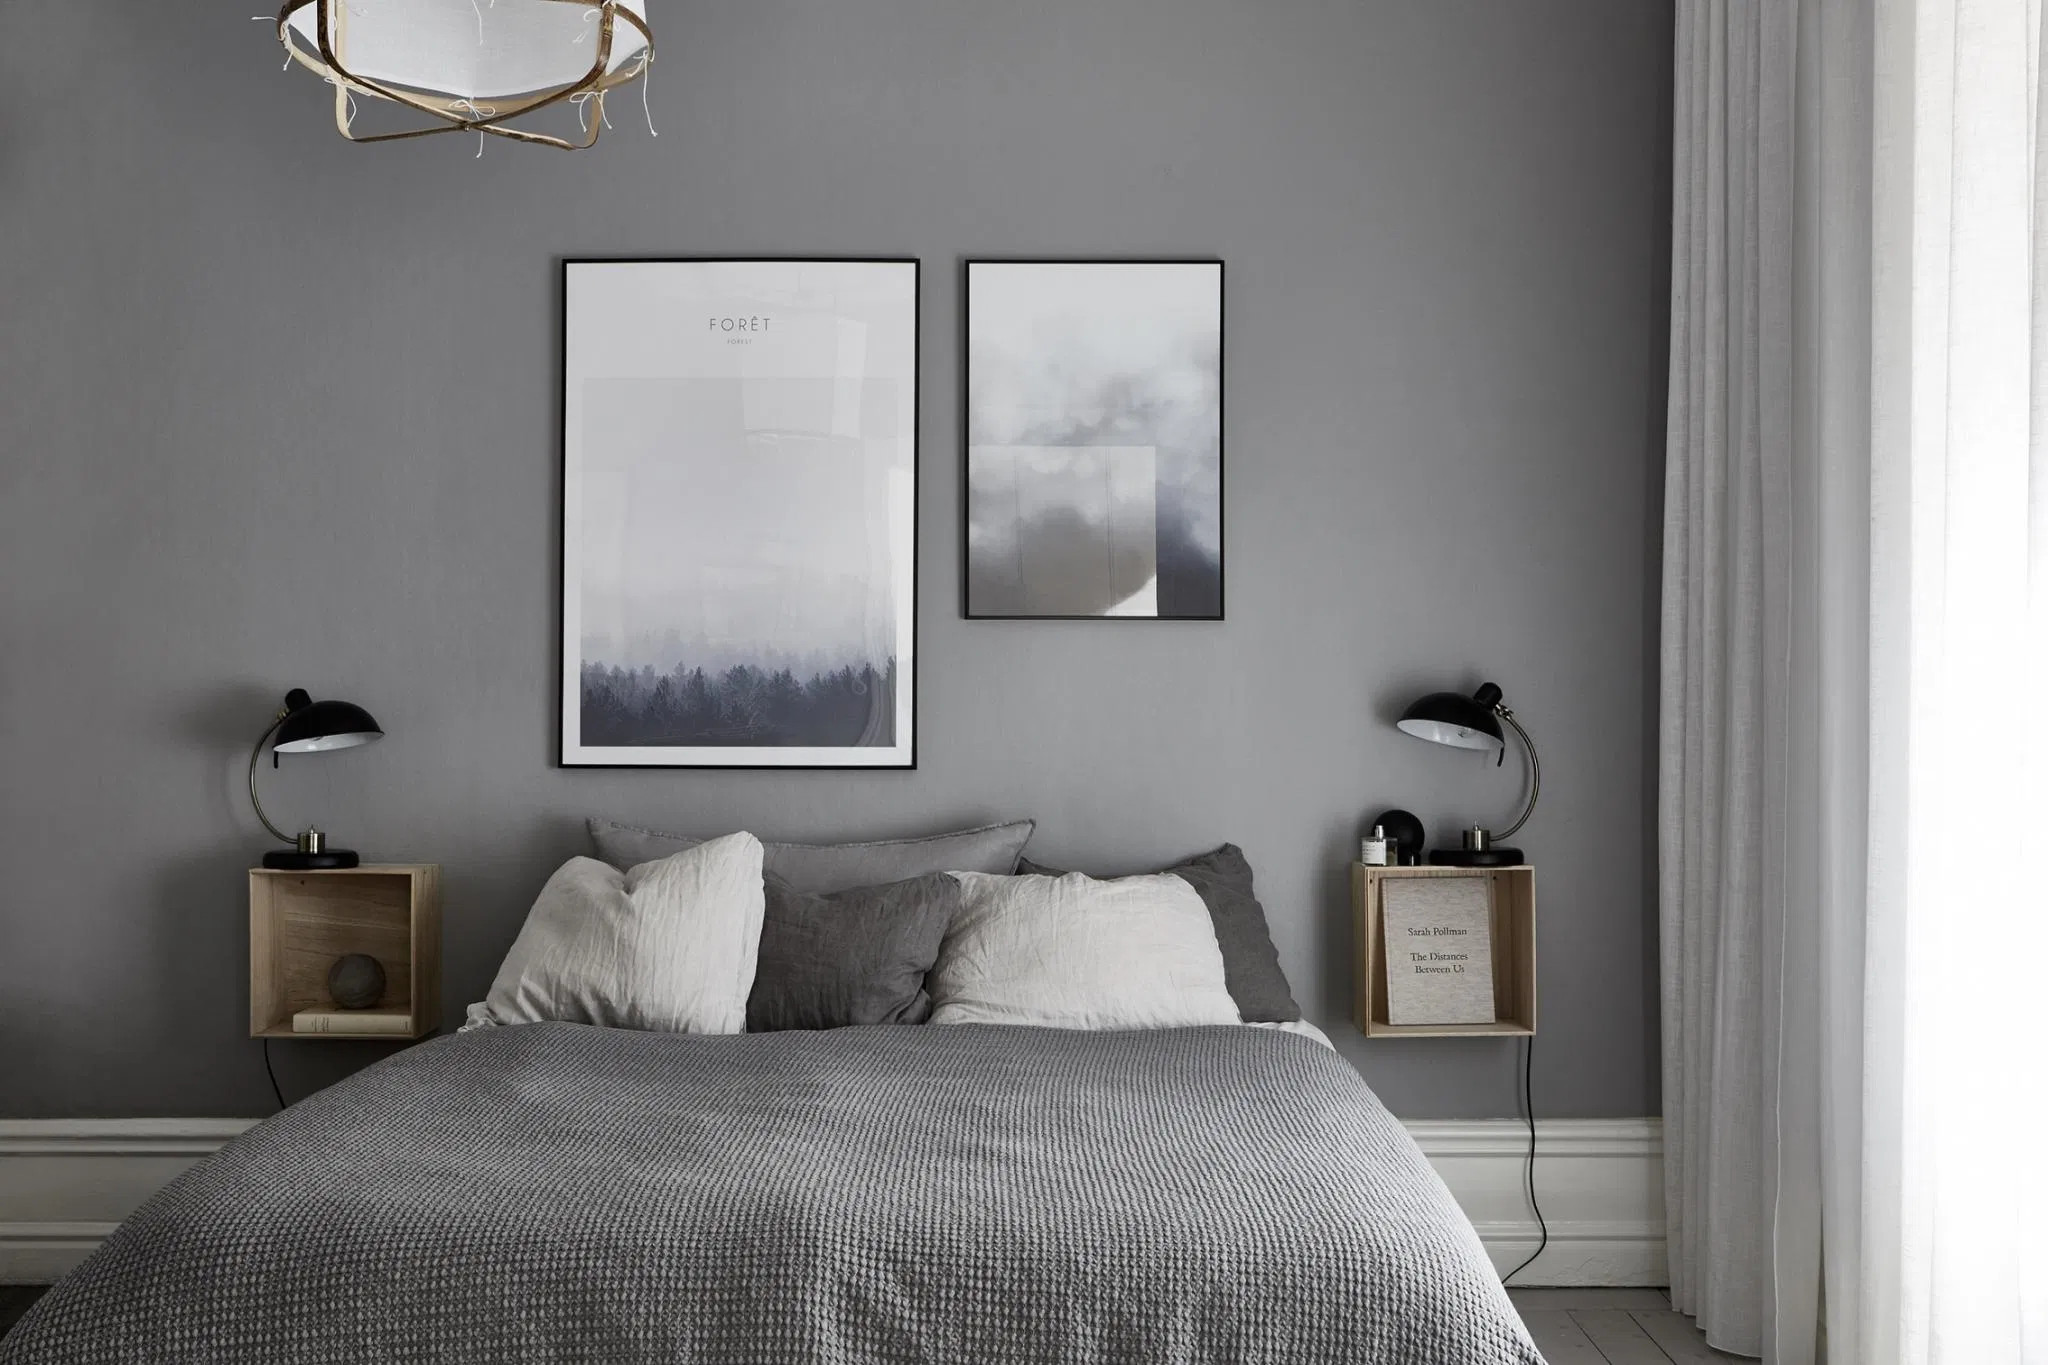 Best Bedroom Colors For Sleep Read Now Before Painting,Living Room Decorating On A Budget